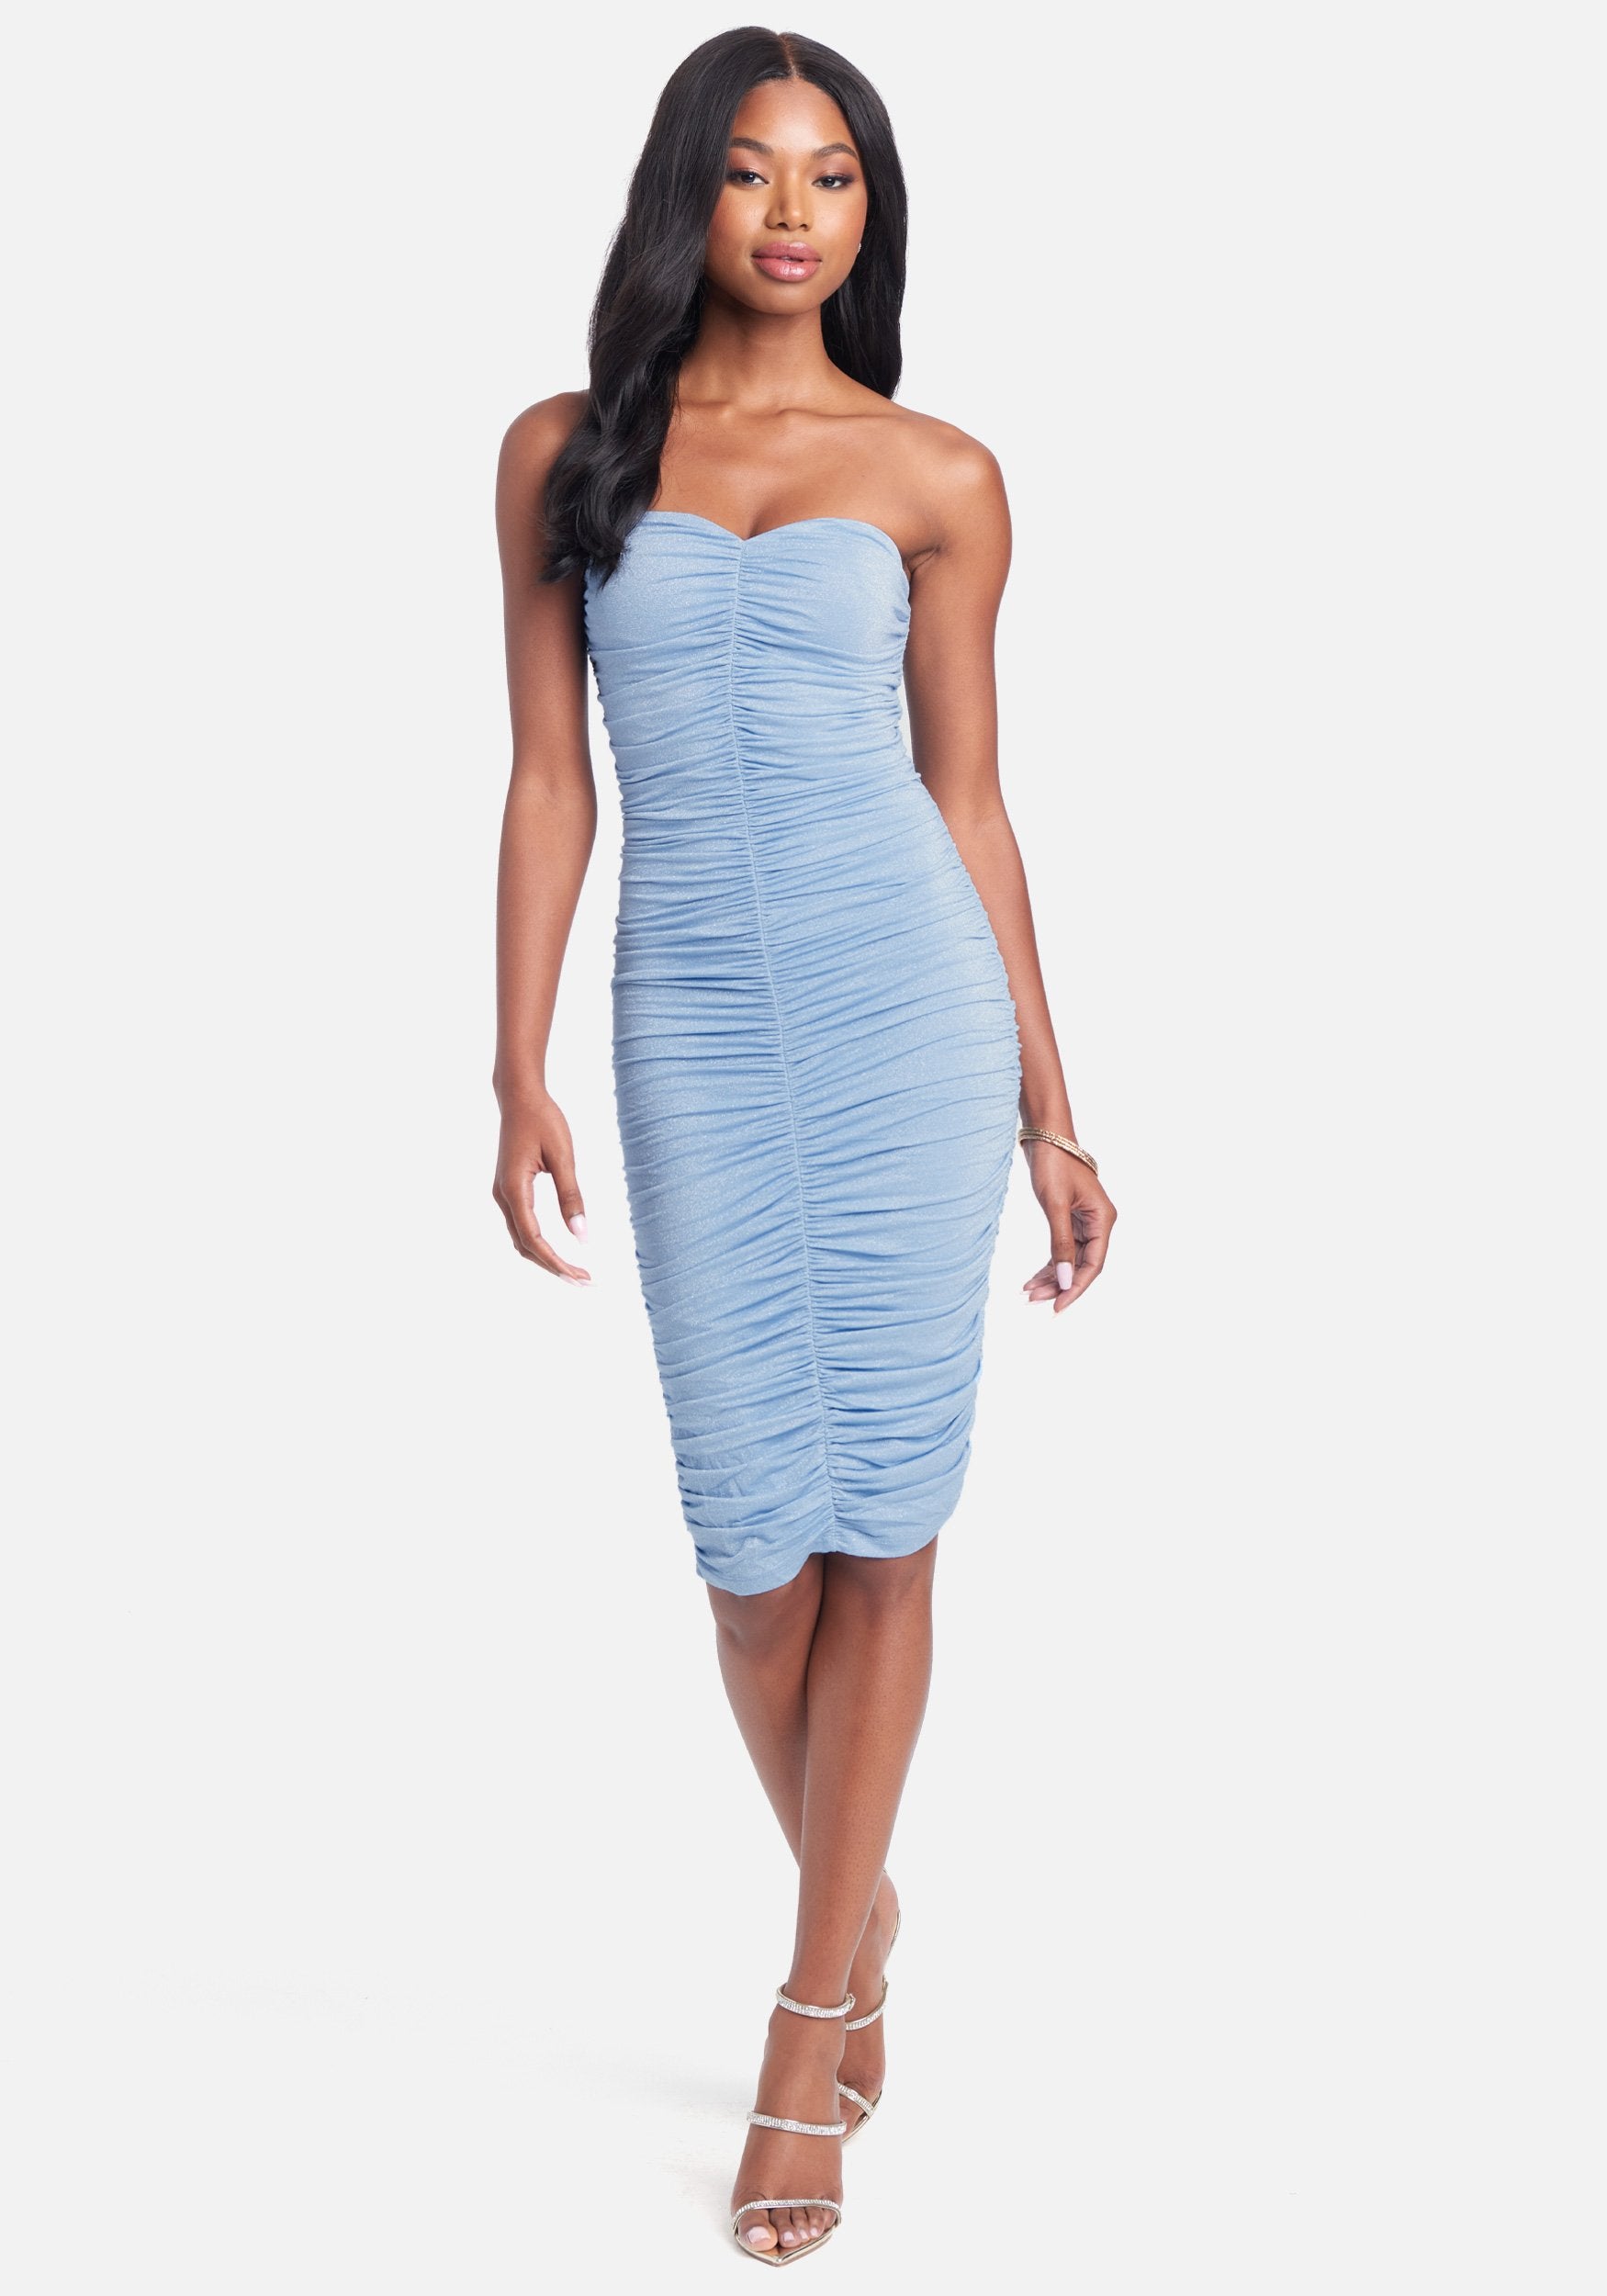  Accessories > Jewelry > Bracelets-Strapless Ruched Sparkle Mesh Dress